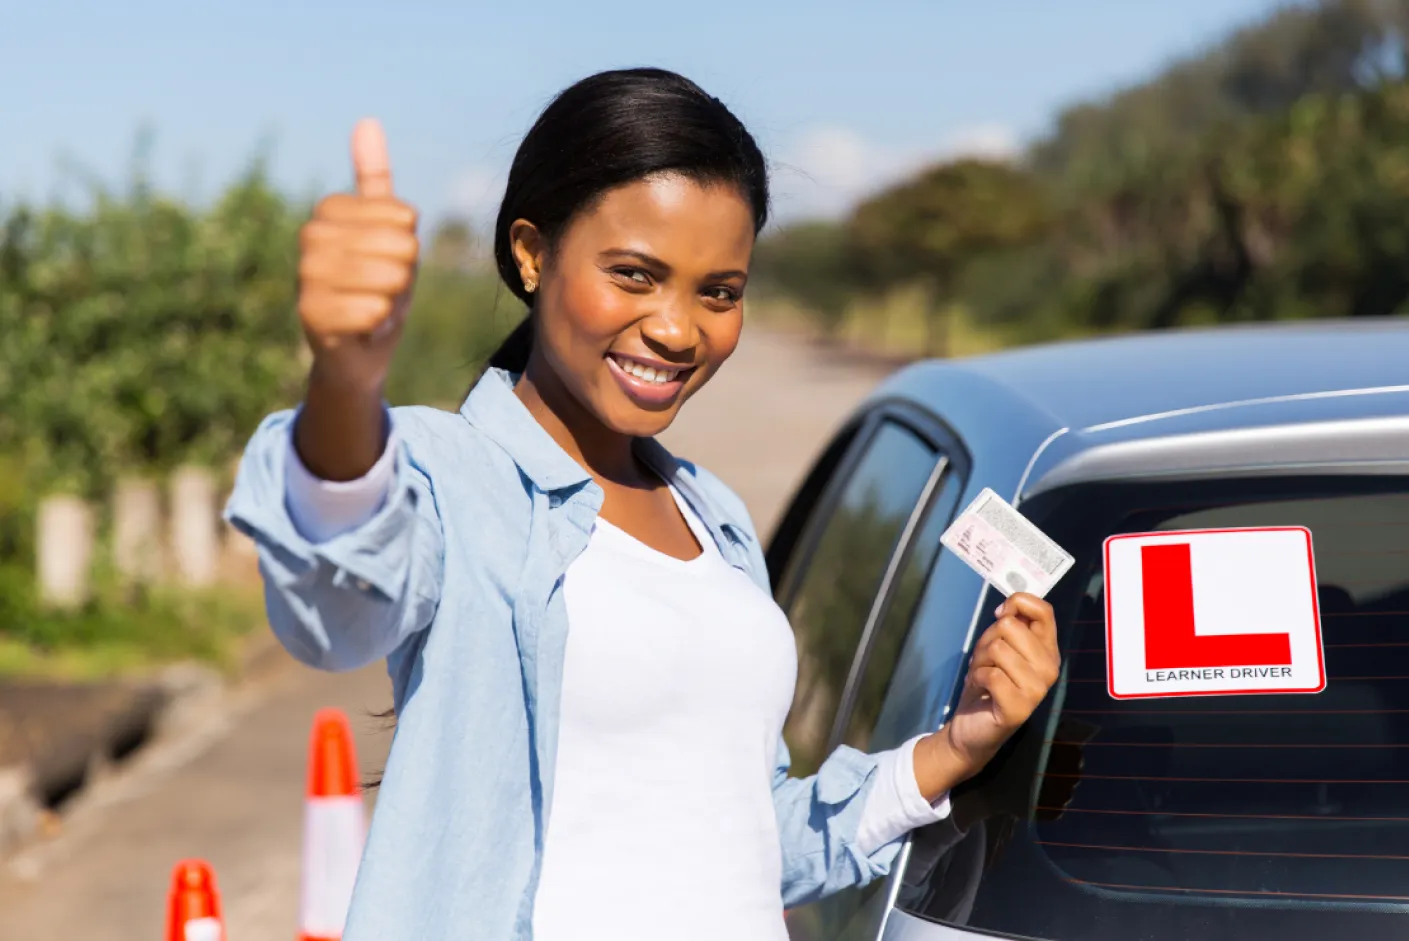 There is Study guide of learners driving test SA of Australia country